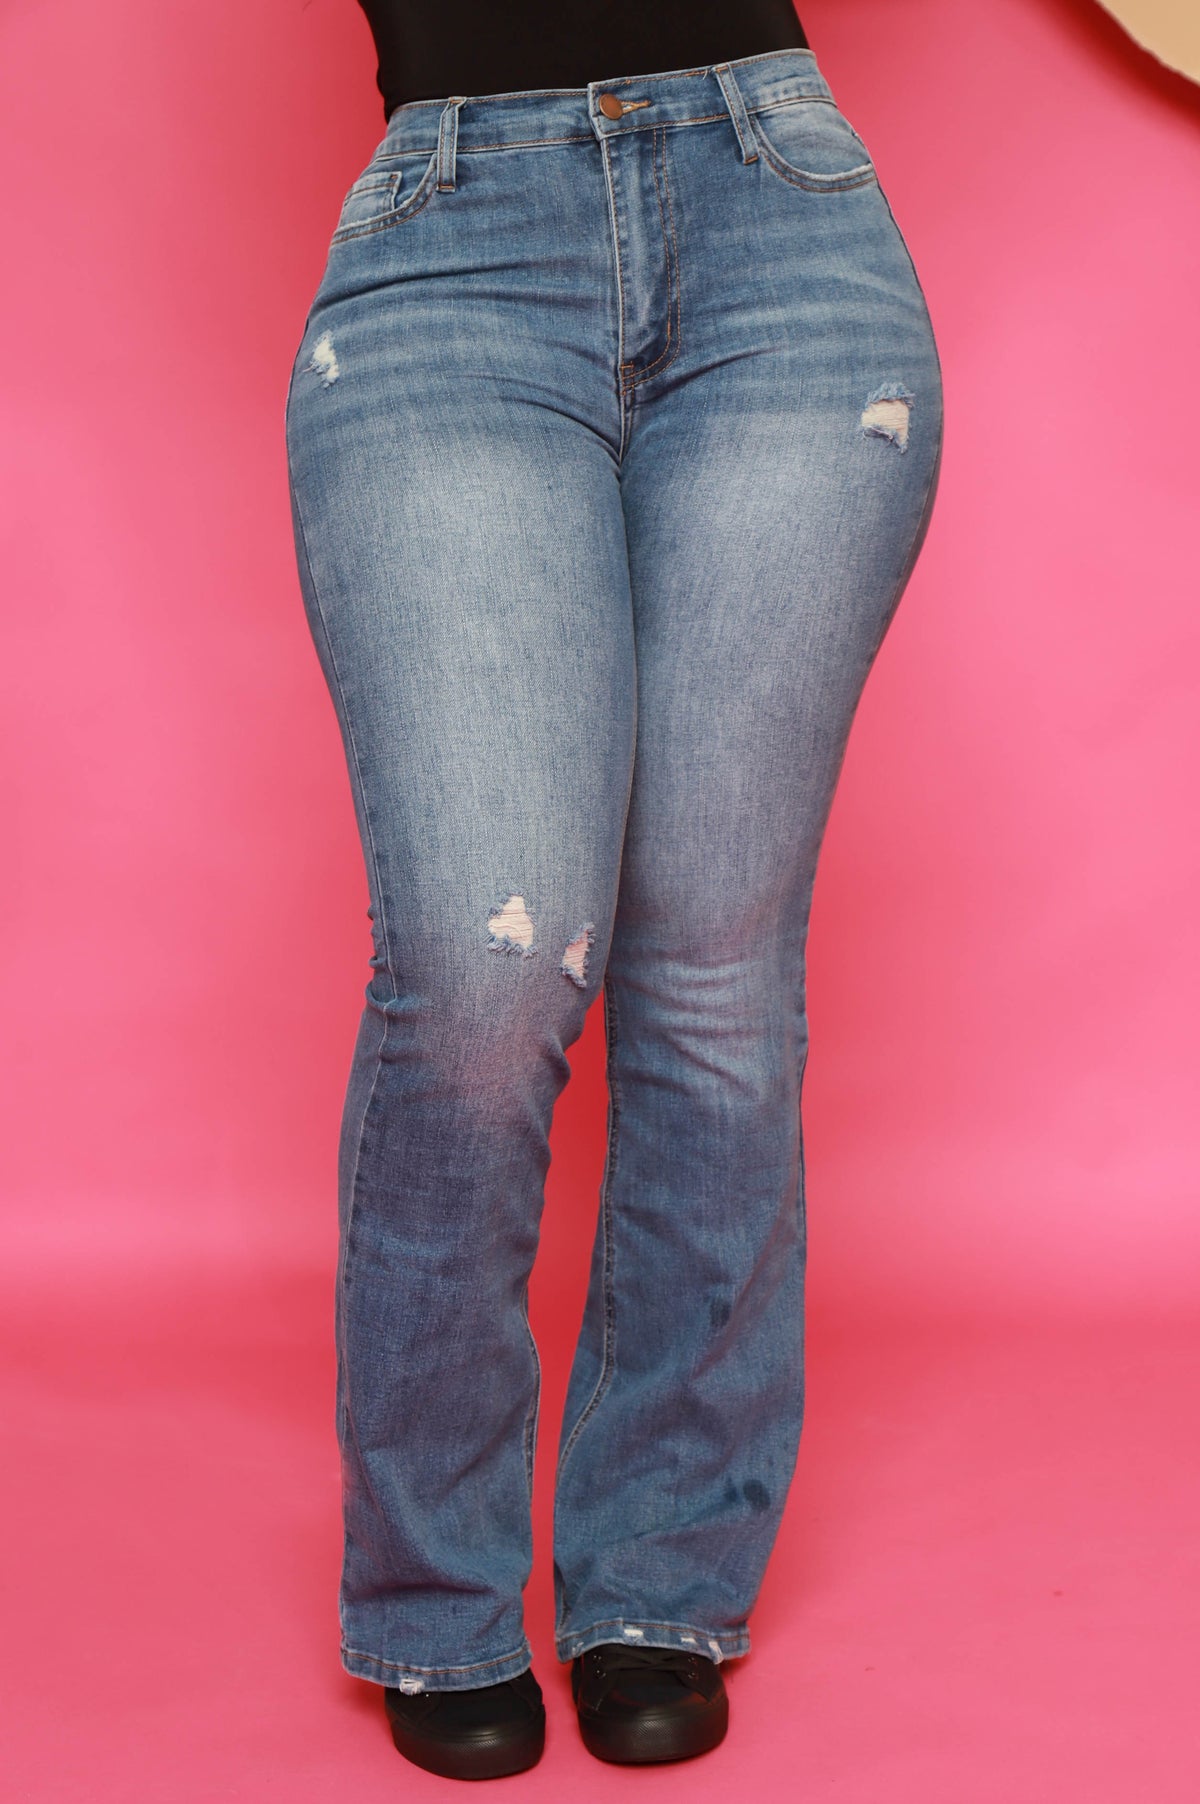 
              Just Say When Distressed Bootcut Jeans - Medium Wash - Swank A Posh
            